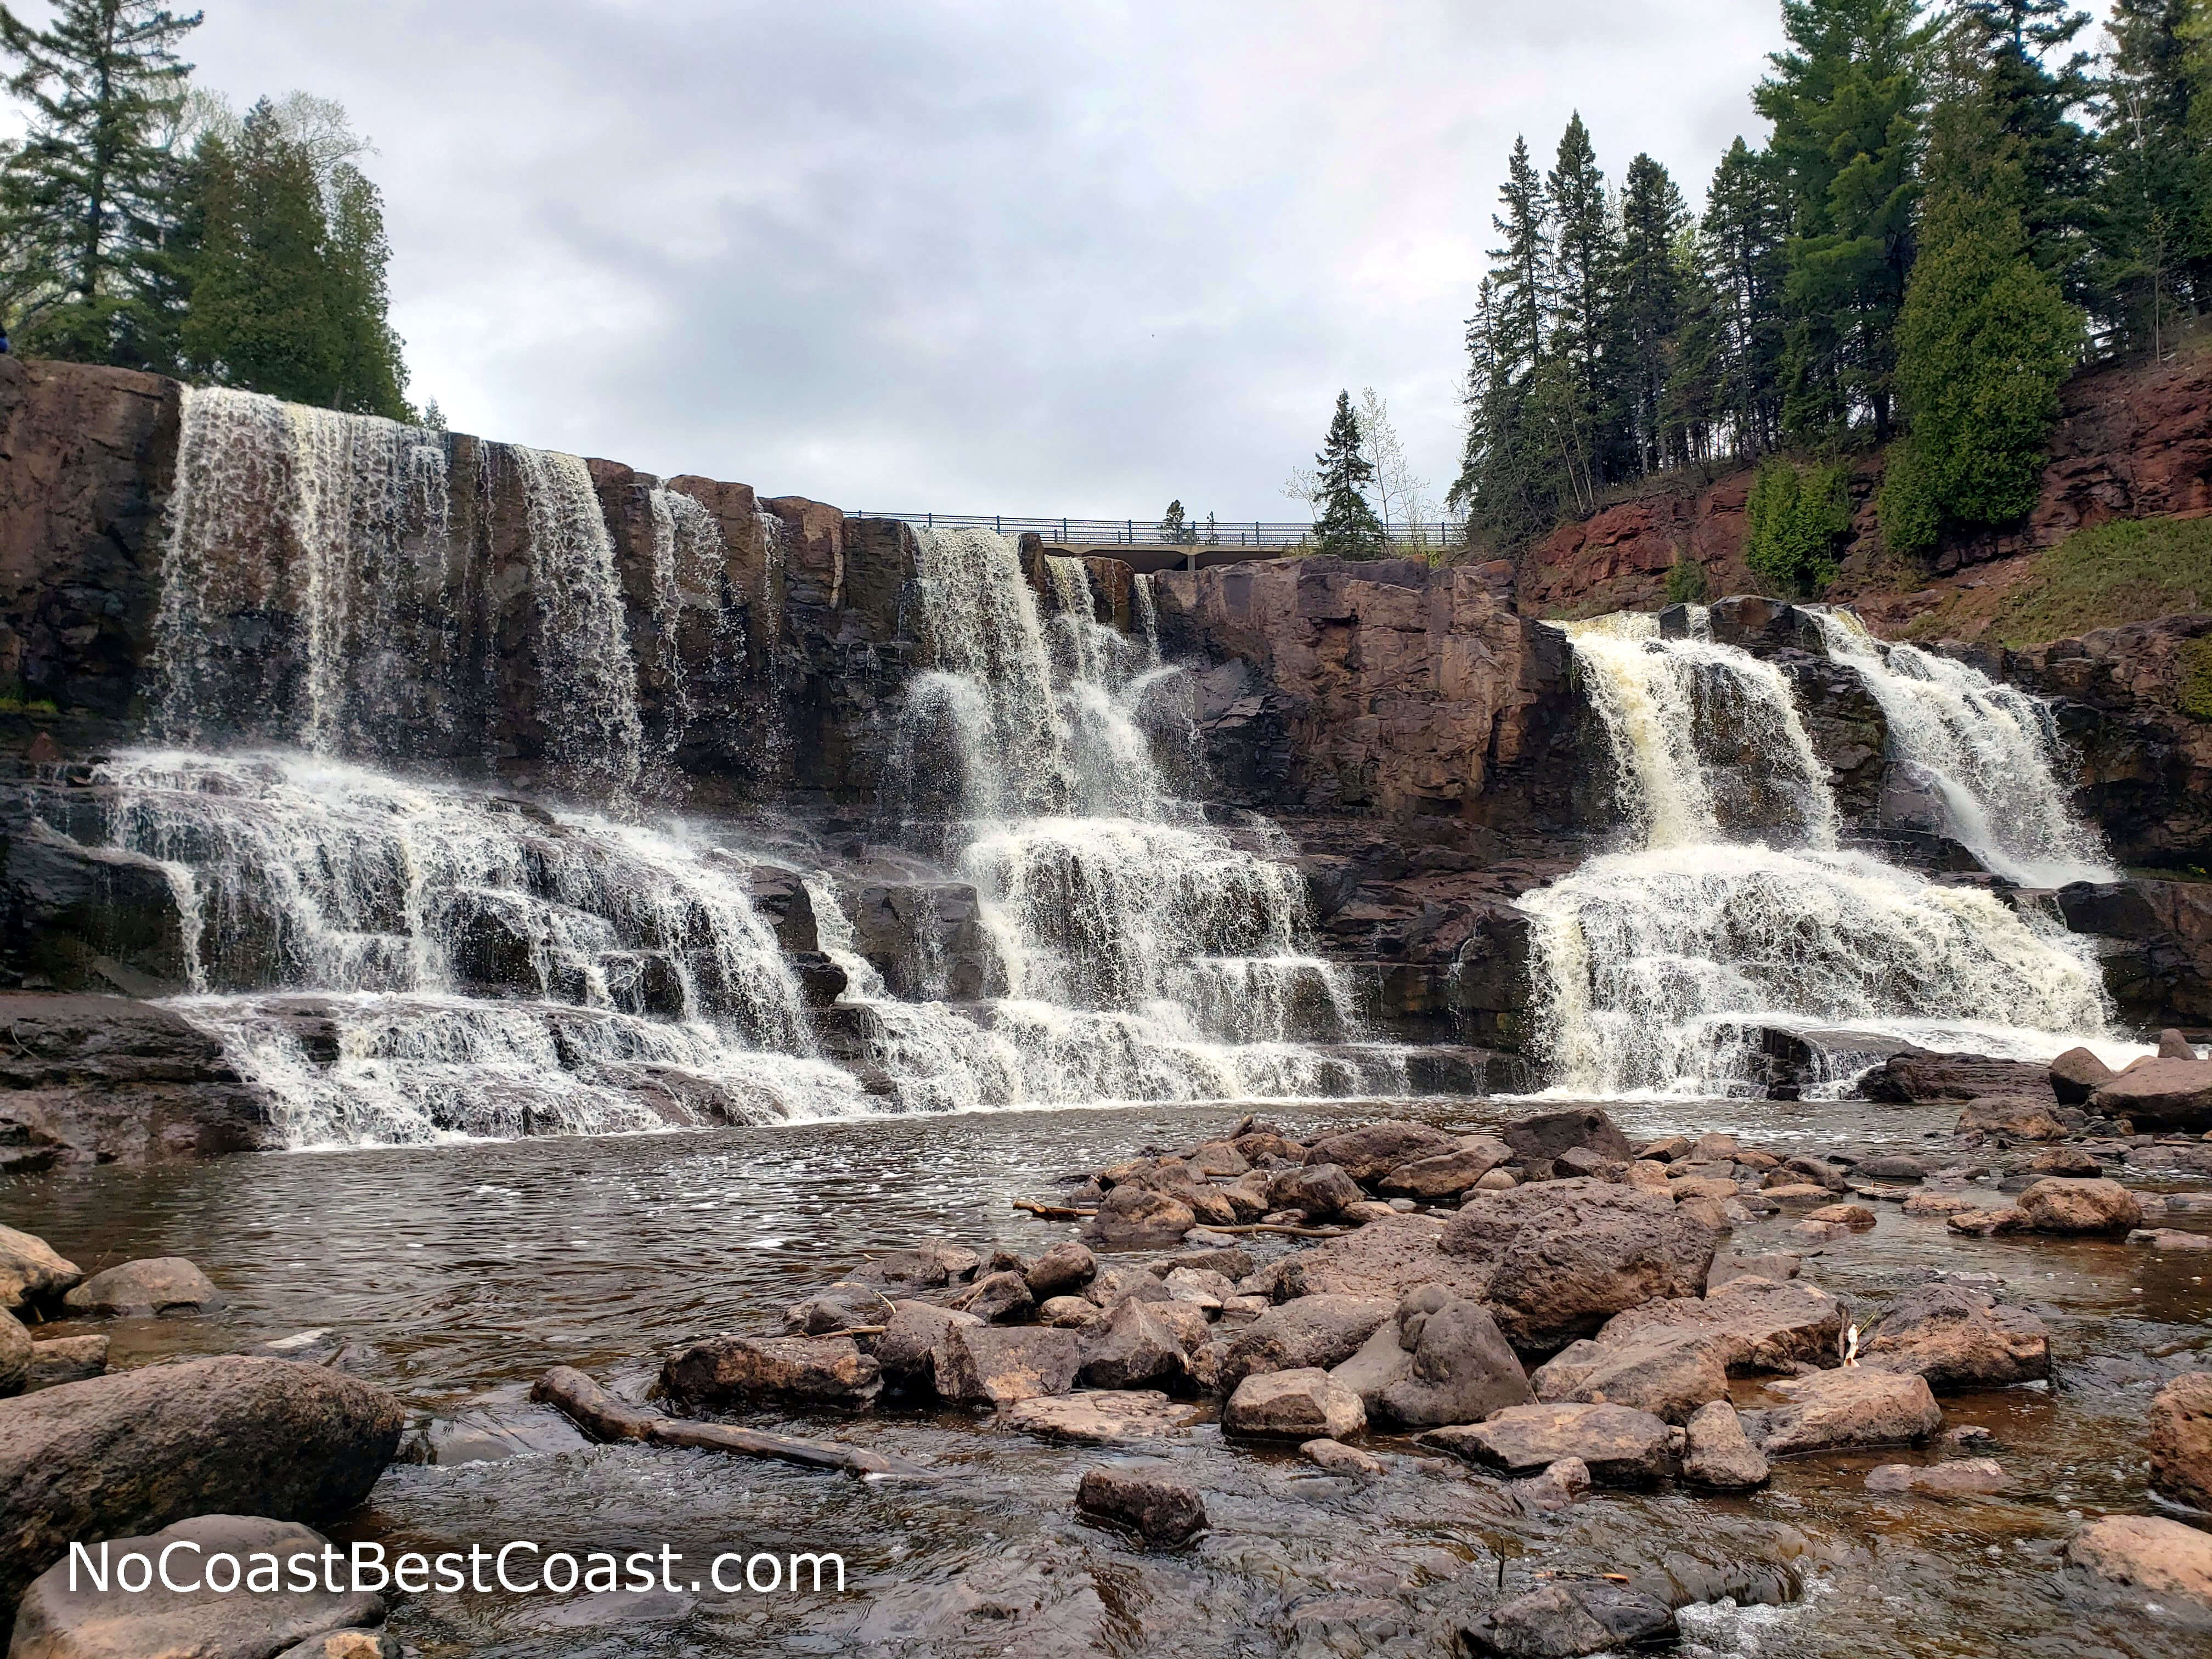 Middle Falls is the widest in Gooseberry Falls